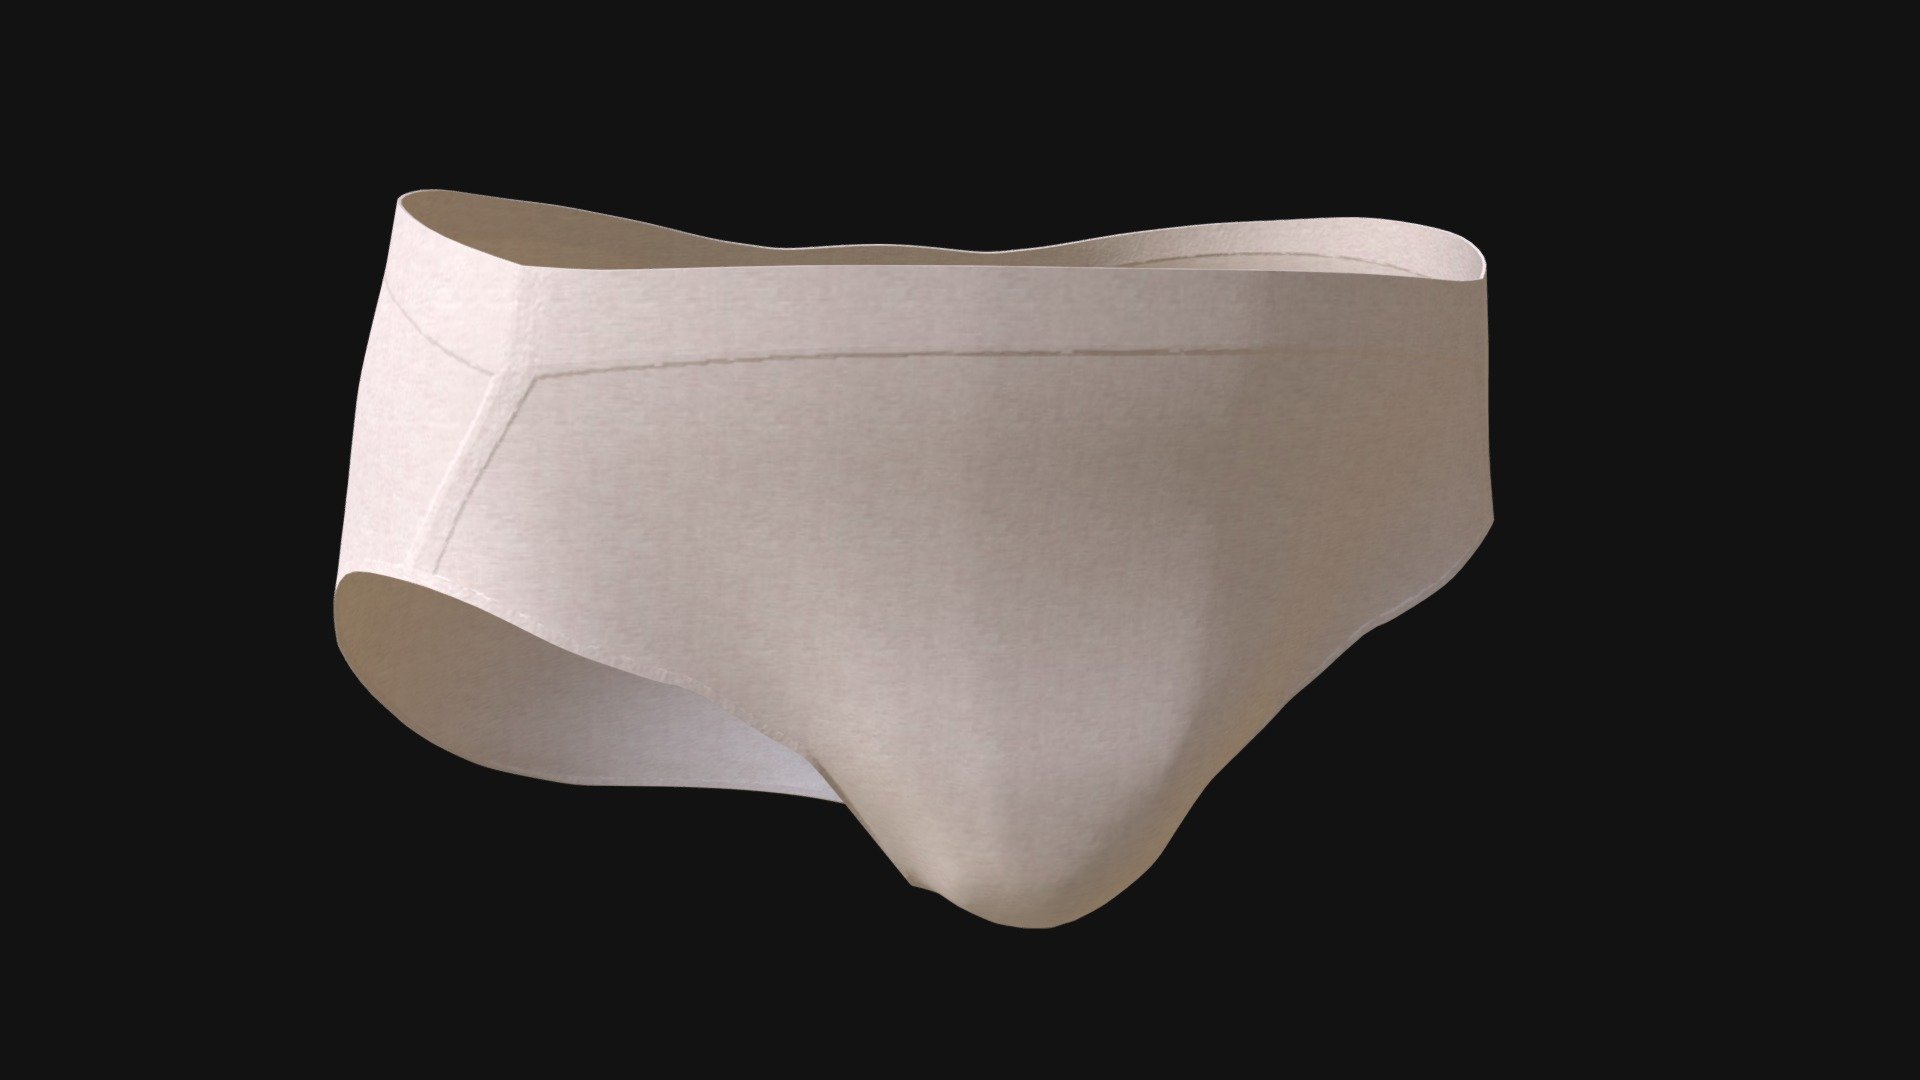 133,281 Underwear Design Images, Stock Photos, 3D objects